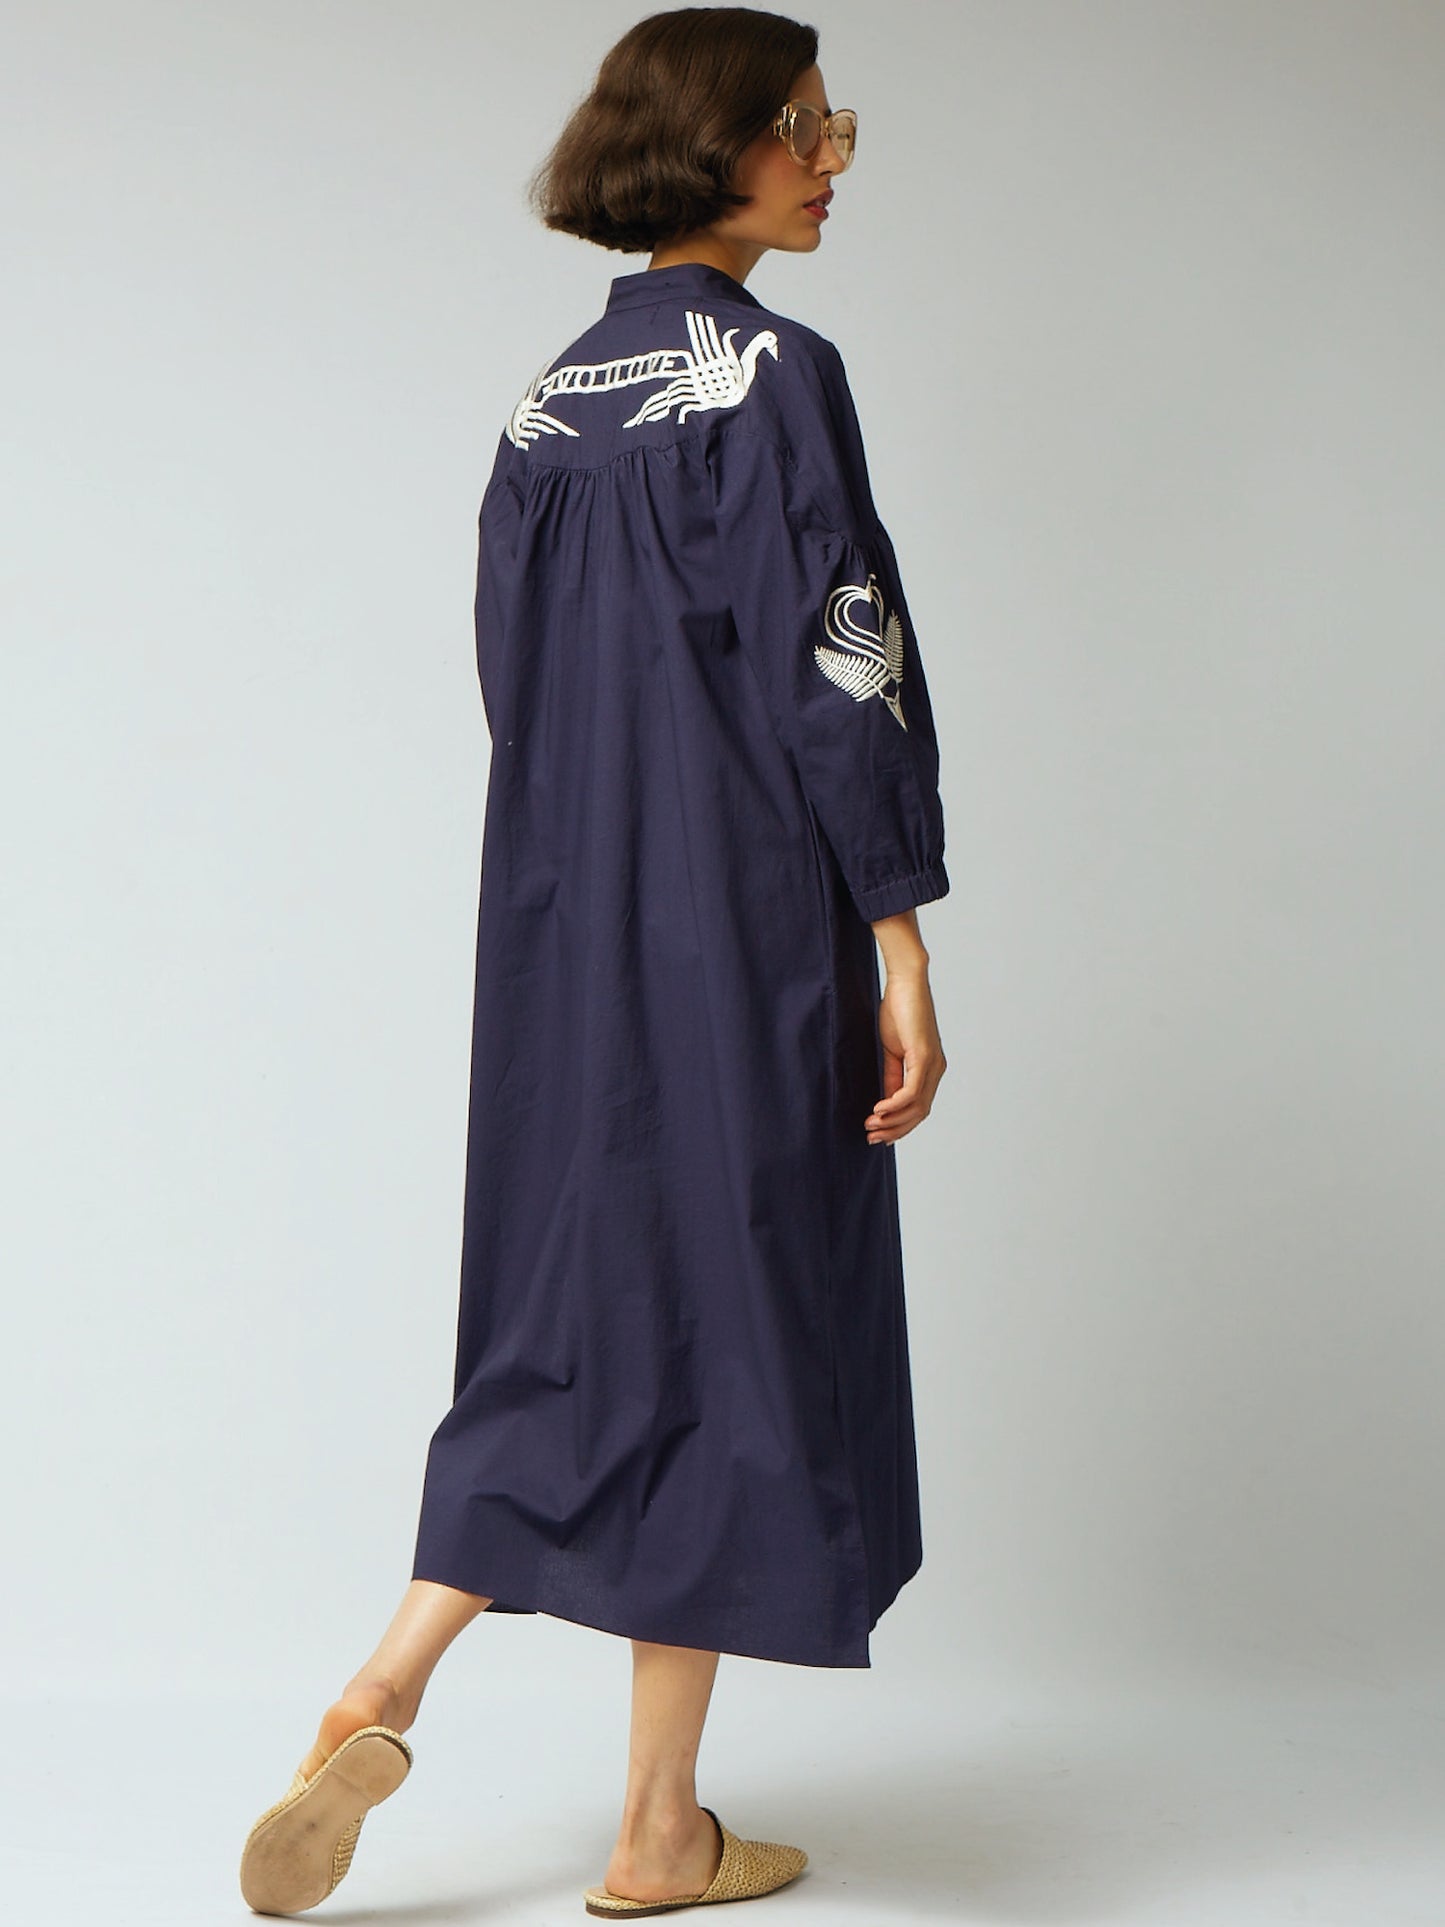 Xanthe Dress Navy Embroidered